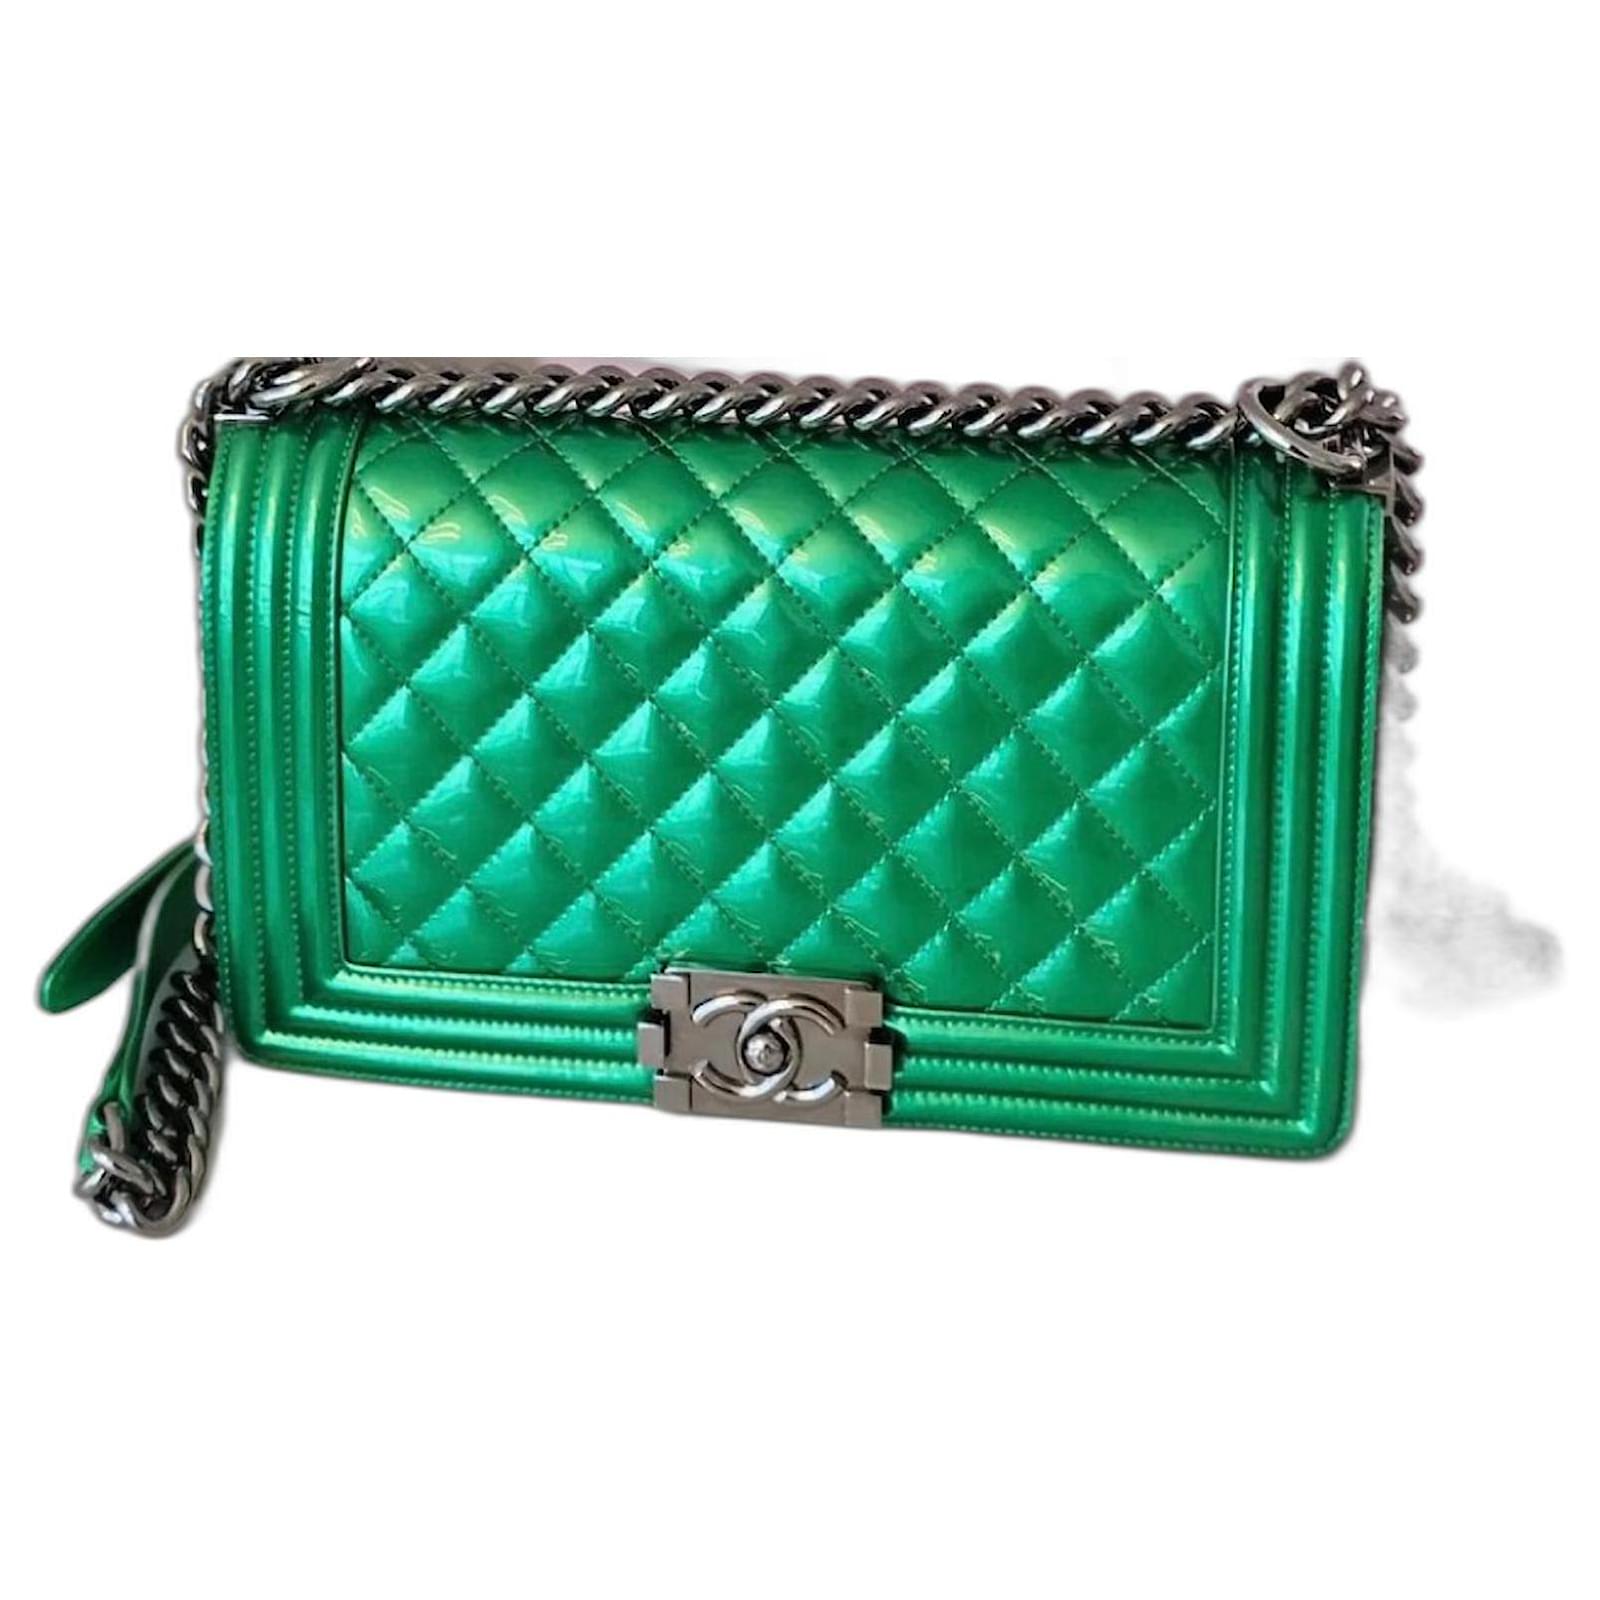 Handbags Chanel Chanel Metallic Green Quilted Leather Medium Boy Flap Bag with Shiny Silver Hardware